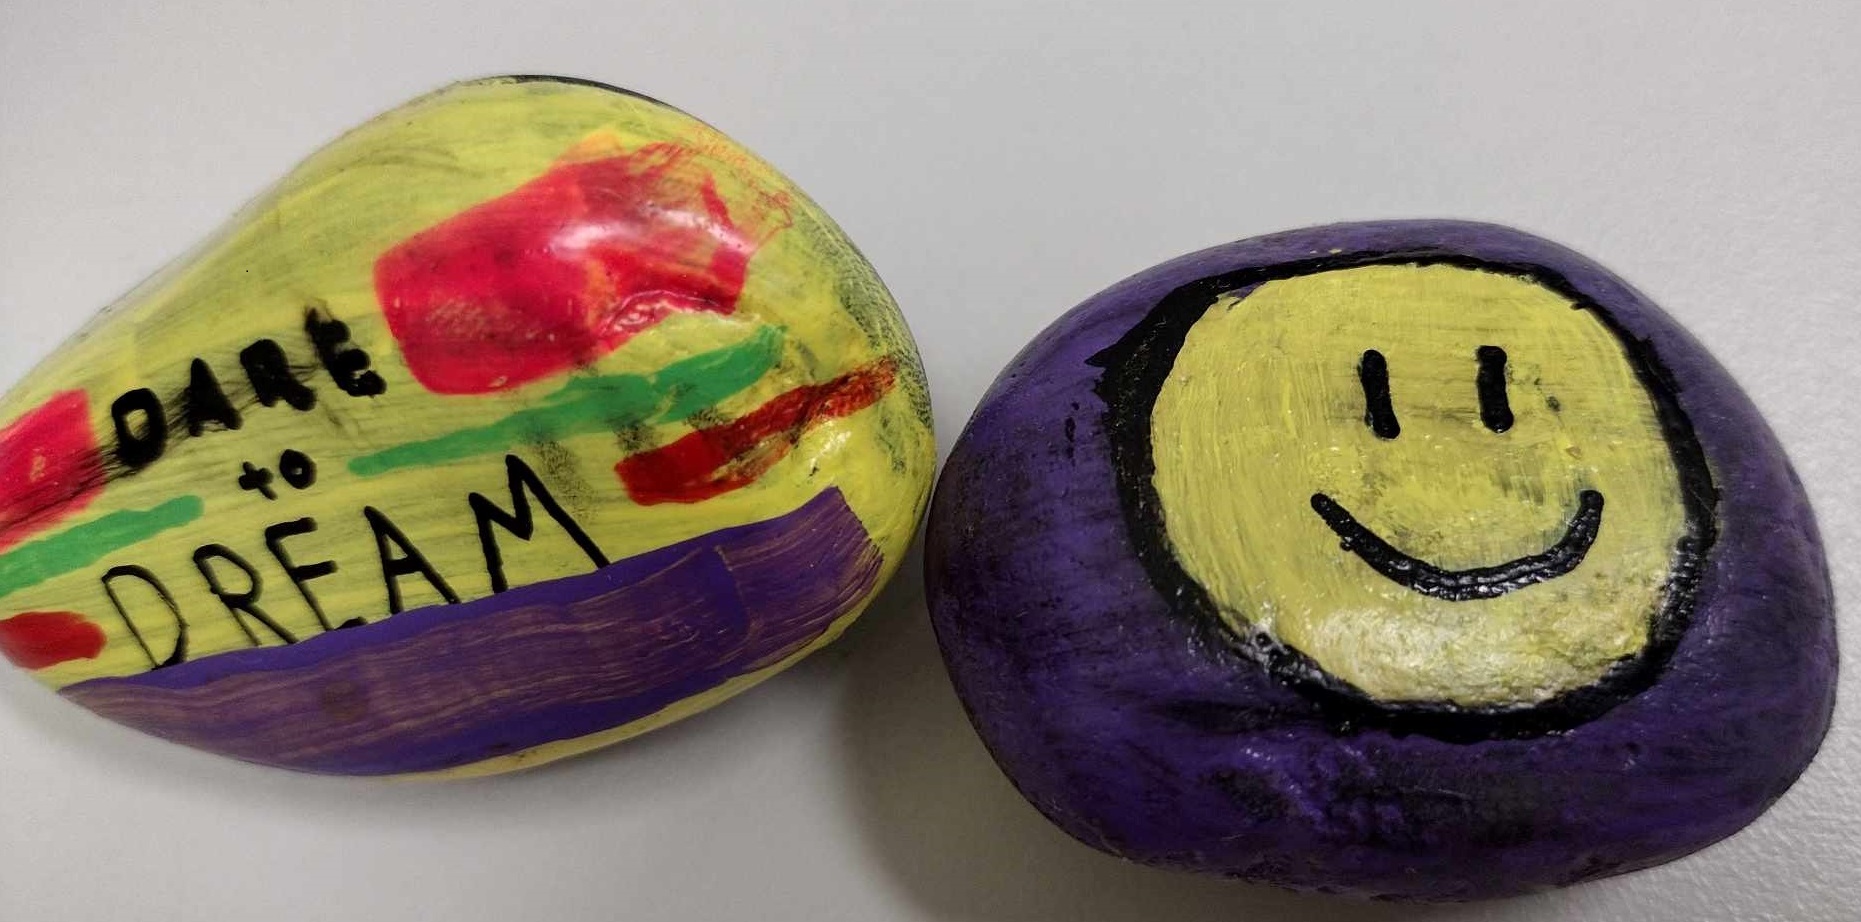 Image of a rock that says "dare to dream" and another rock with a painted a smiley face.